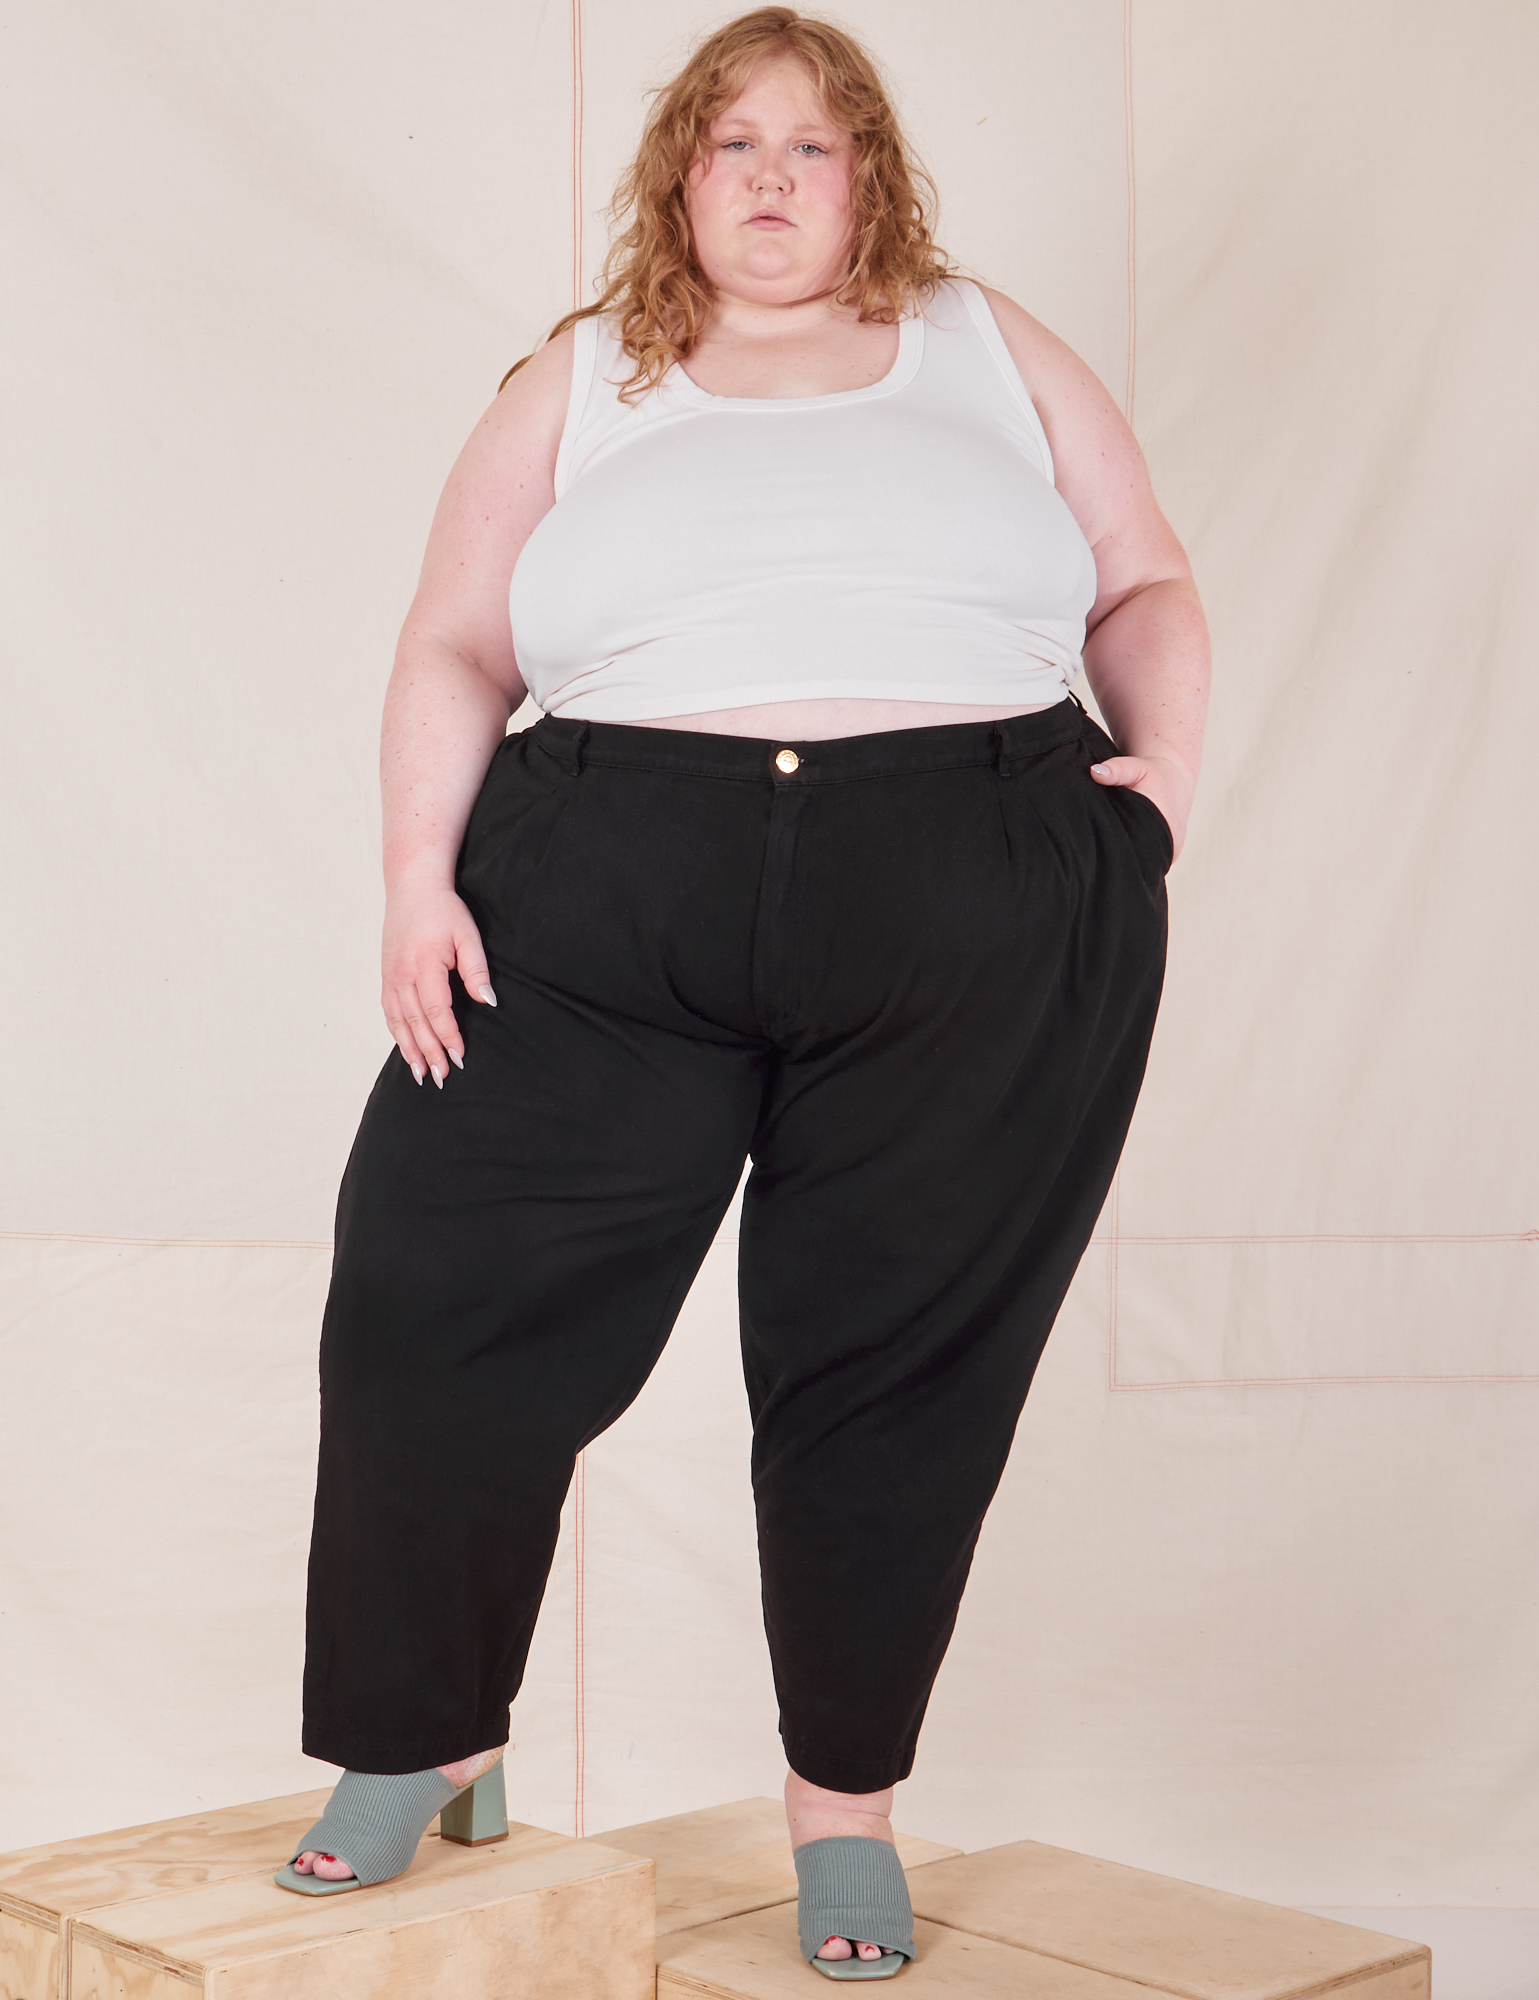 Catie is 5&#39;11&quot; and wearing 4XL Heavyweight Trousers in Basic Black paired with Cropped Tank Top in vintage tee off-white